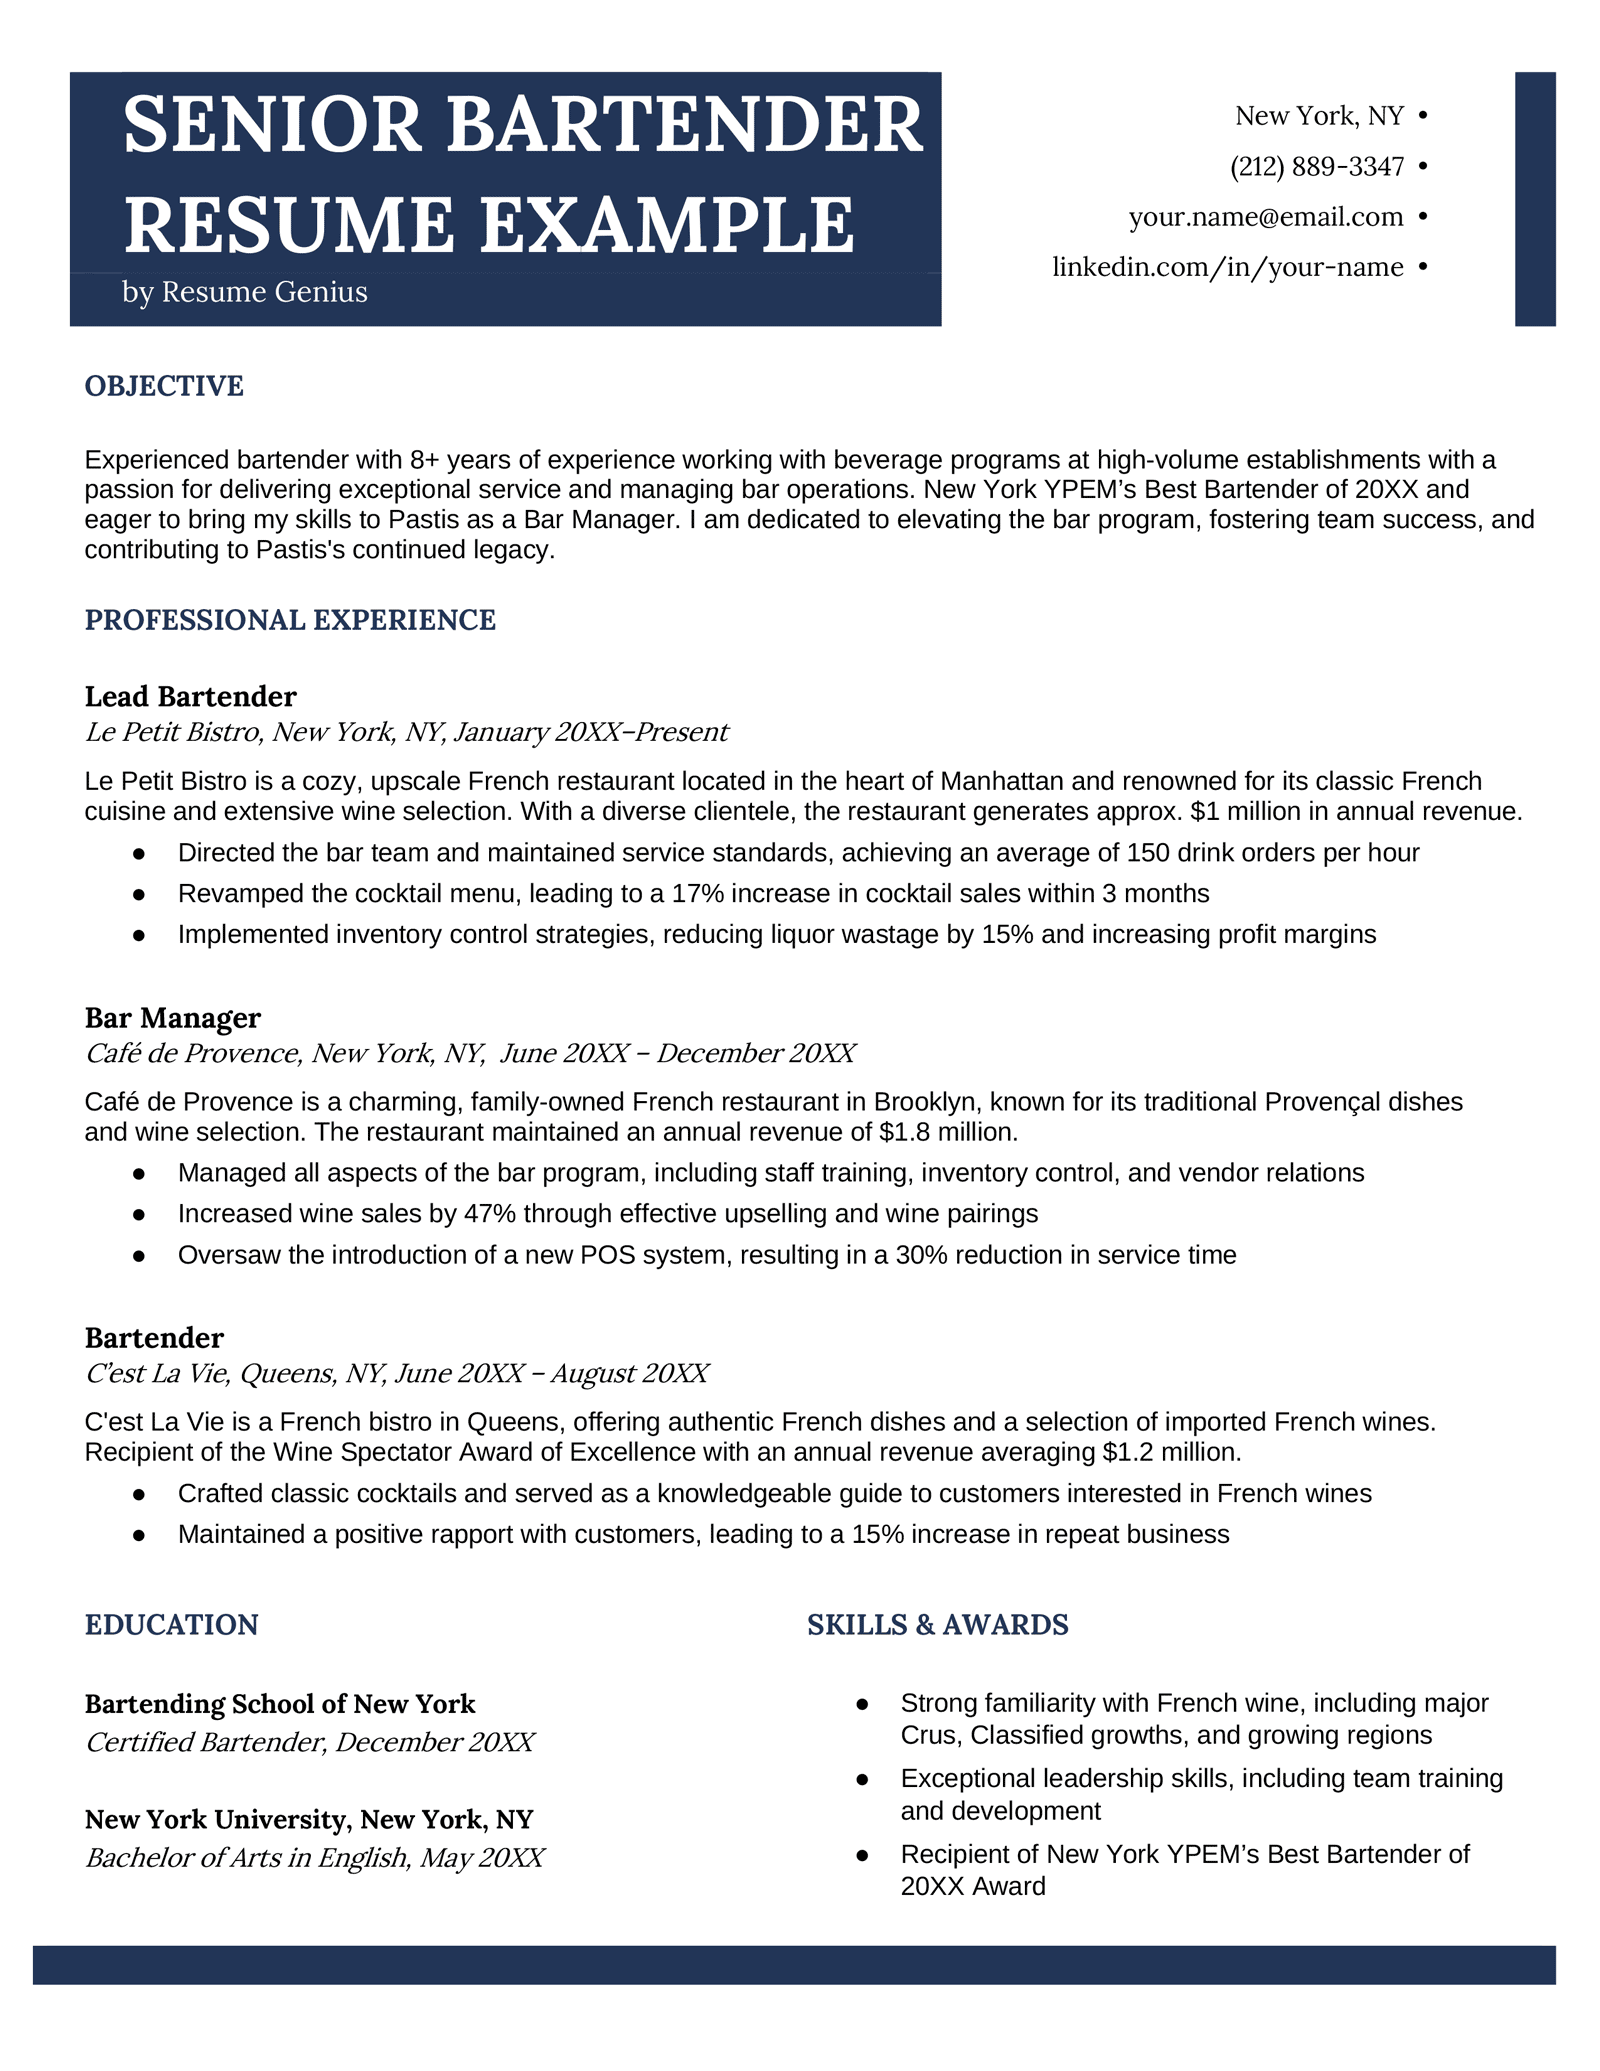 Example of an experienced bartender resume with leader bartender and bar manager experience, using a professional resume template with dark blue headings and design elements.